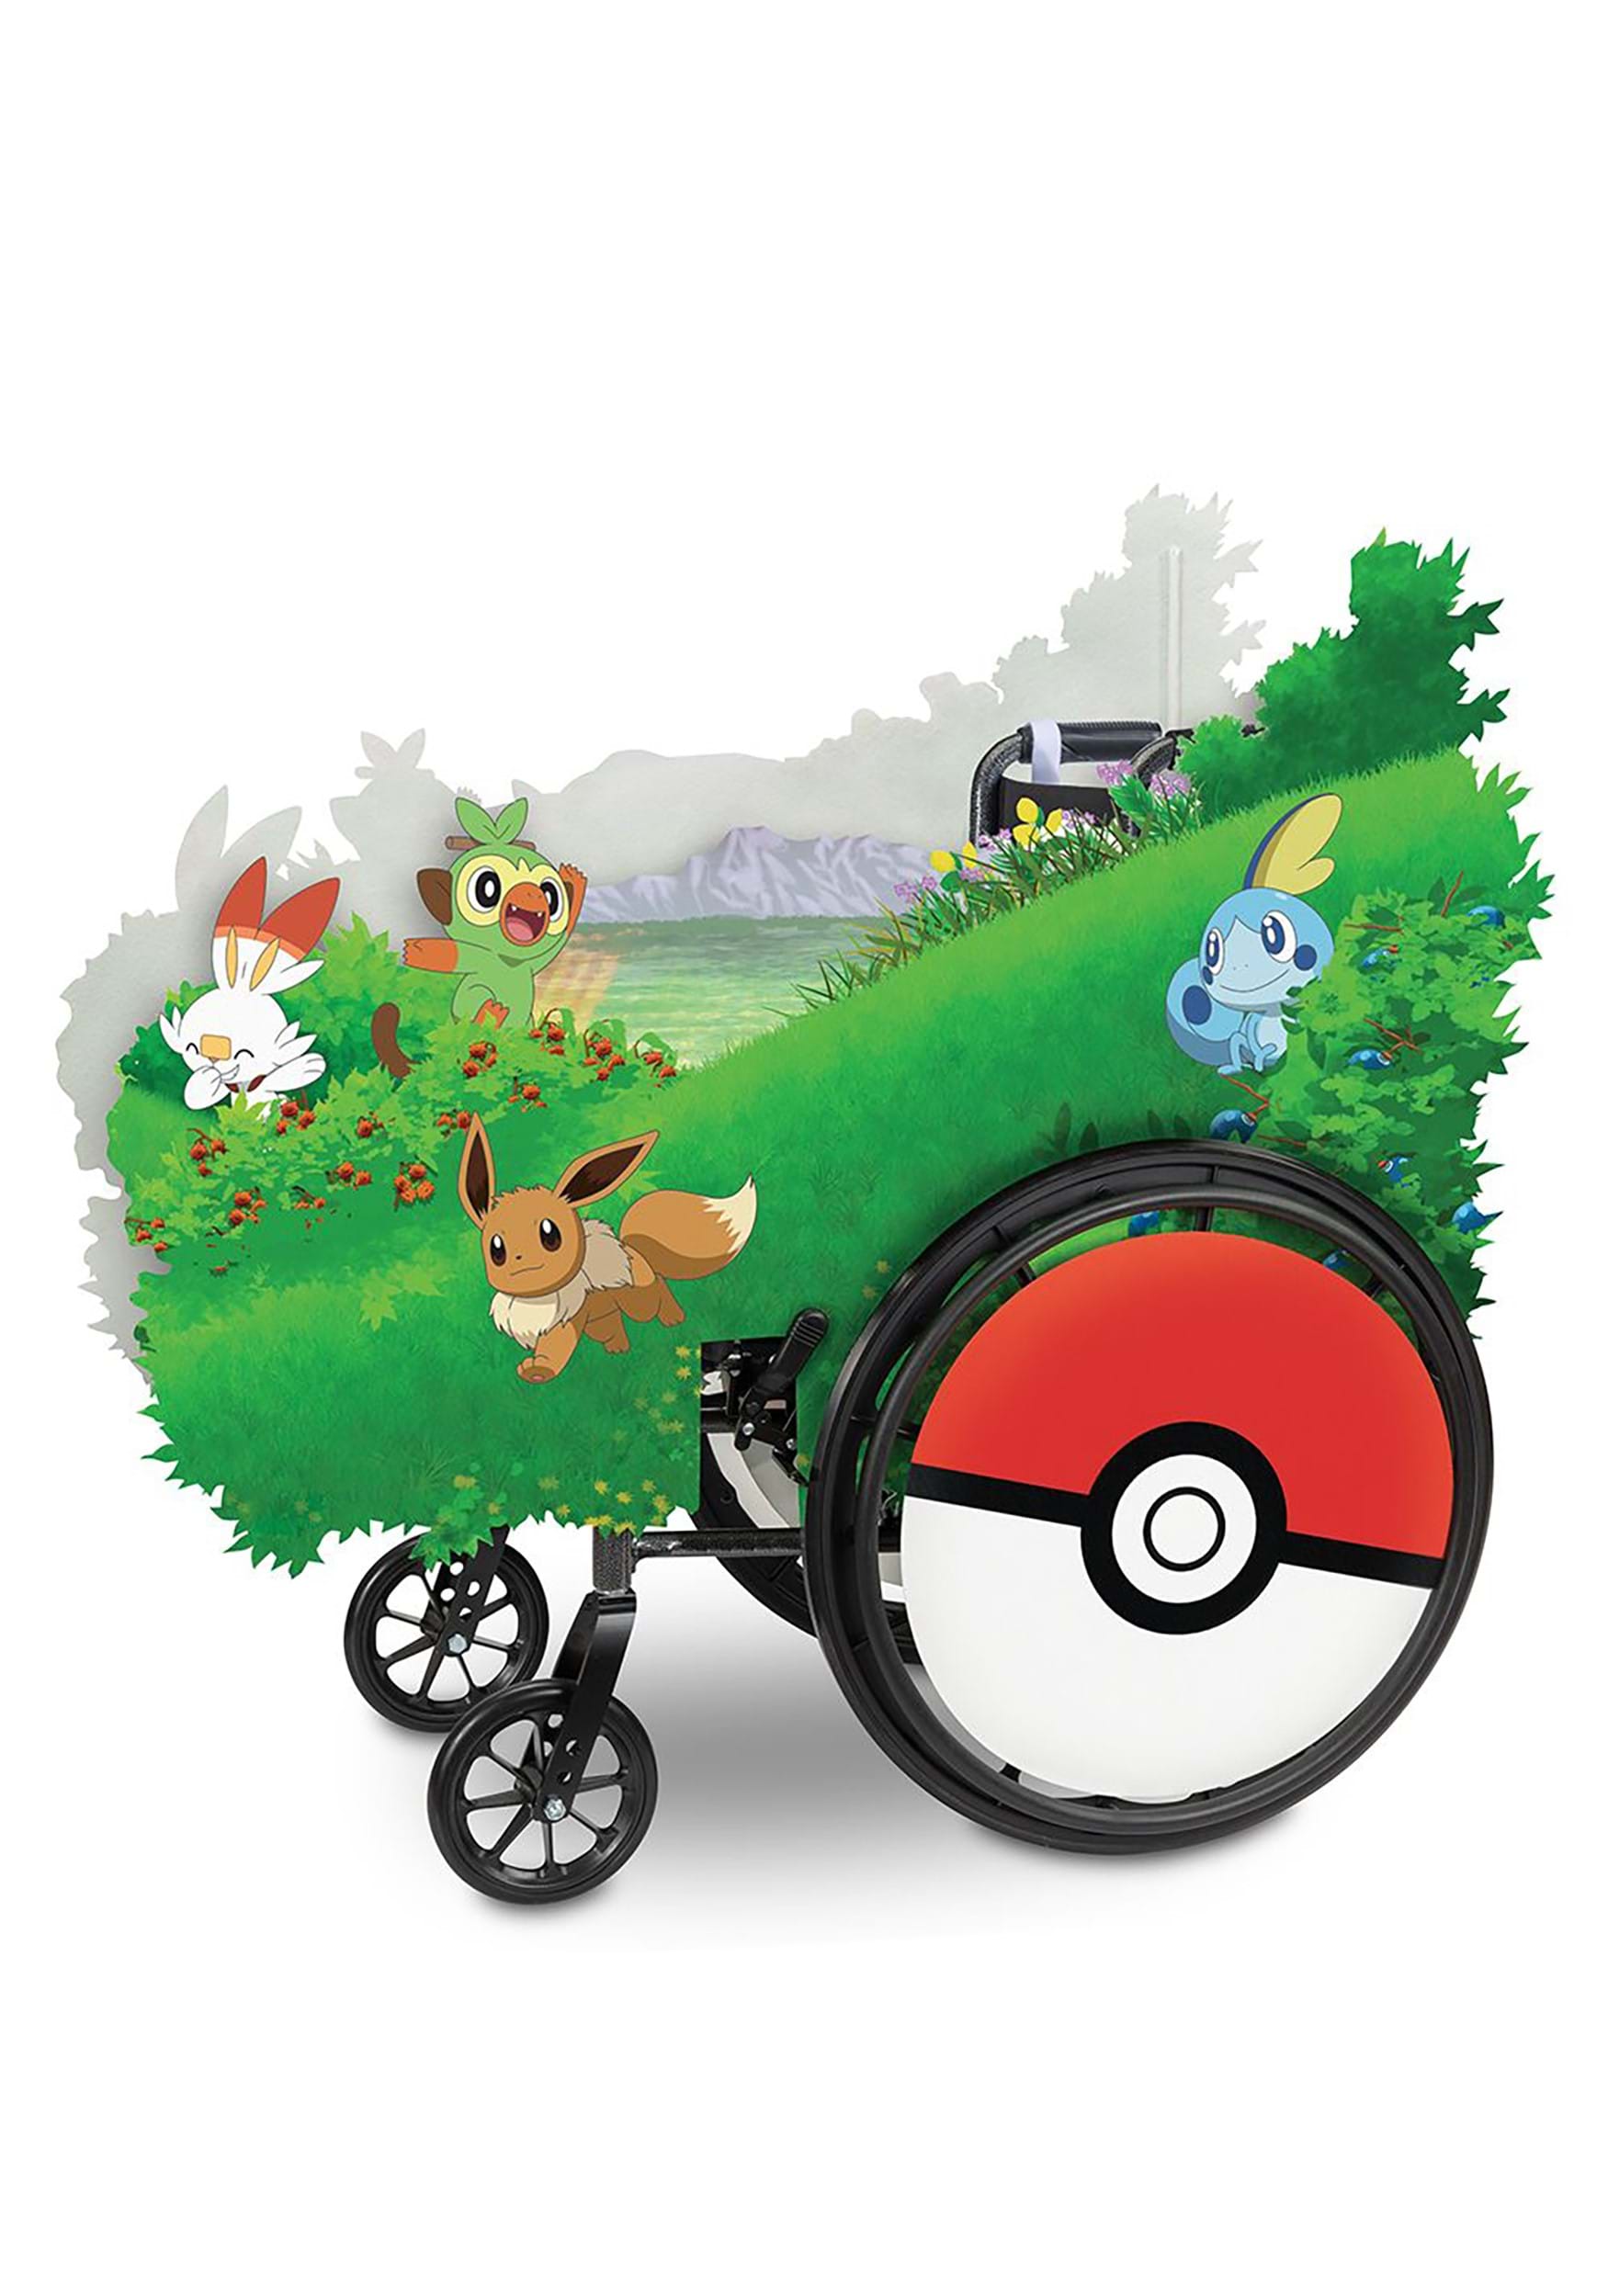 Photos - Fancy Dress COVER Disguise Pokemon Adaptive Wheelchair  Green/Red/White DI12855 